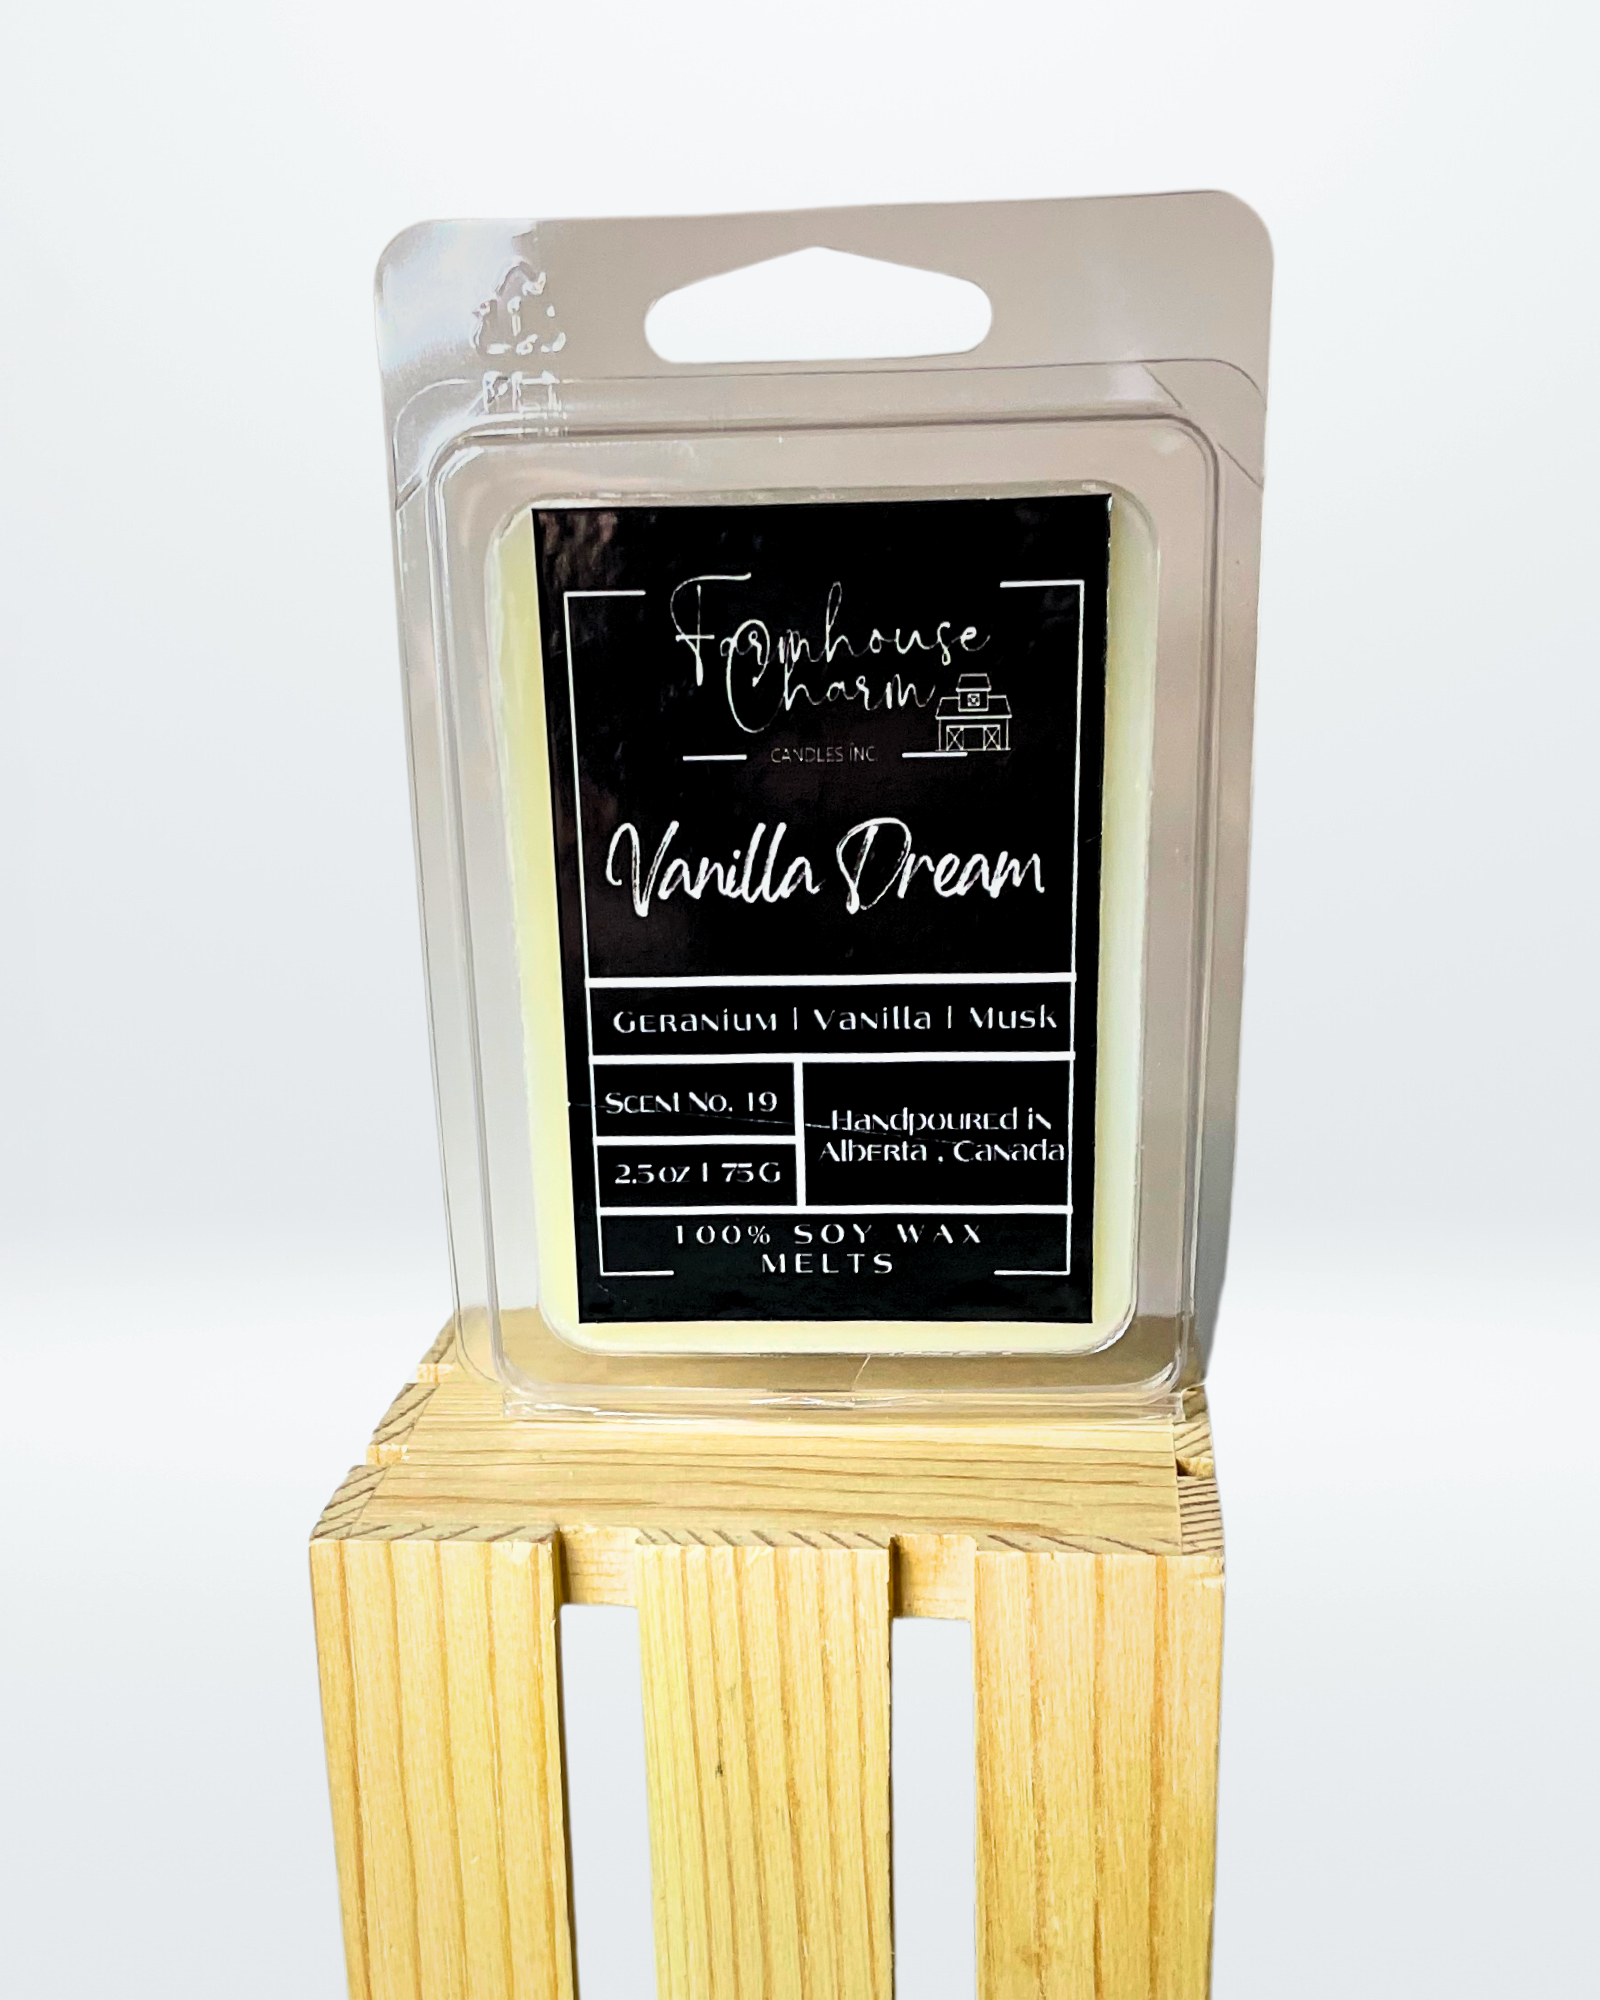 Vanilla Dream Soy Wax Melts, a fragrance that transcends the ordinary! Unlike the conventional vanilla scents, the Vanilla Dream Soy Wax Melts offer a luxurious, dreamy aroma that captivates the senses. The rich, toasted vanilla scents blended with sweet geranium florals and a hint of musk creates a unique olfactory experience that is beyond ordinary. Get ready to indulge in this sophisticated fragrance that is sure to enchant you. www.farmhousecharmcandles.com